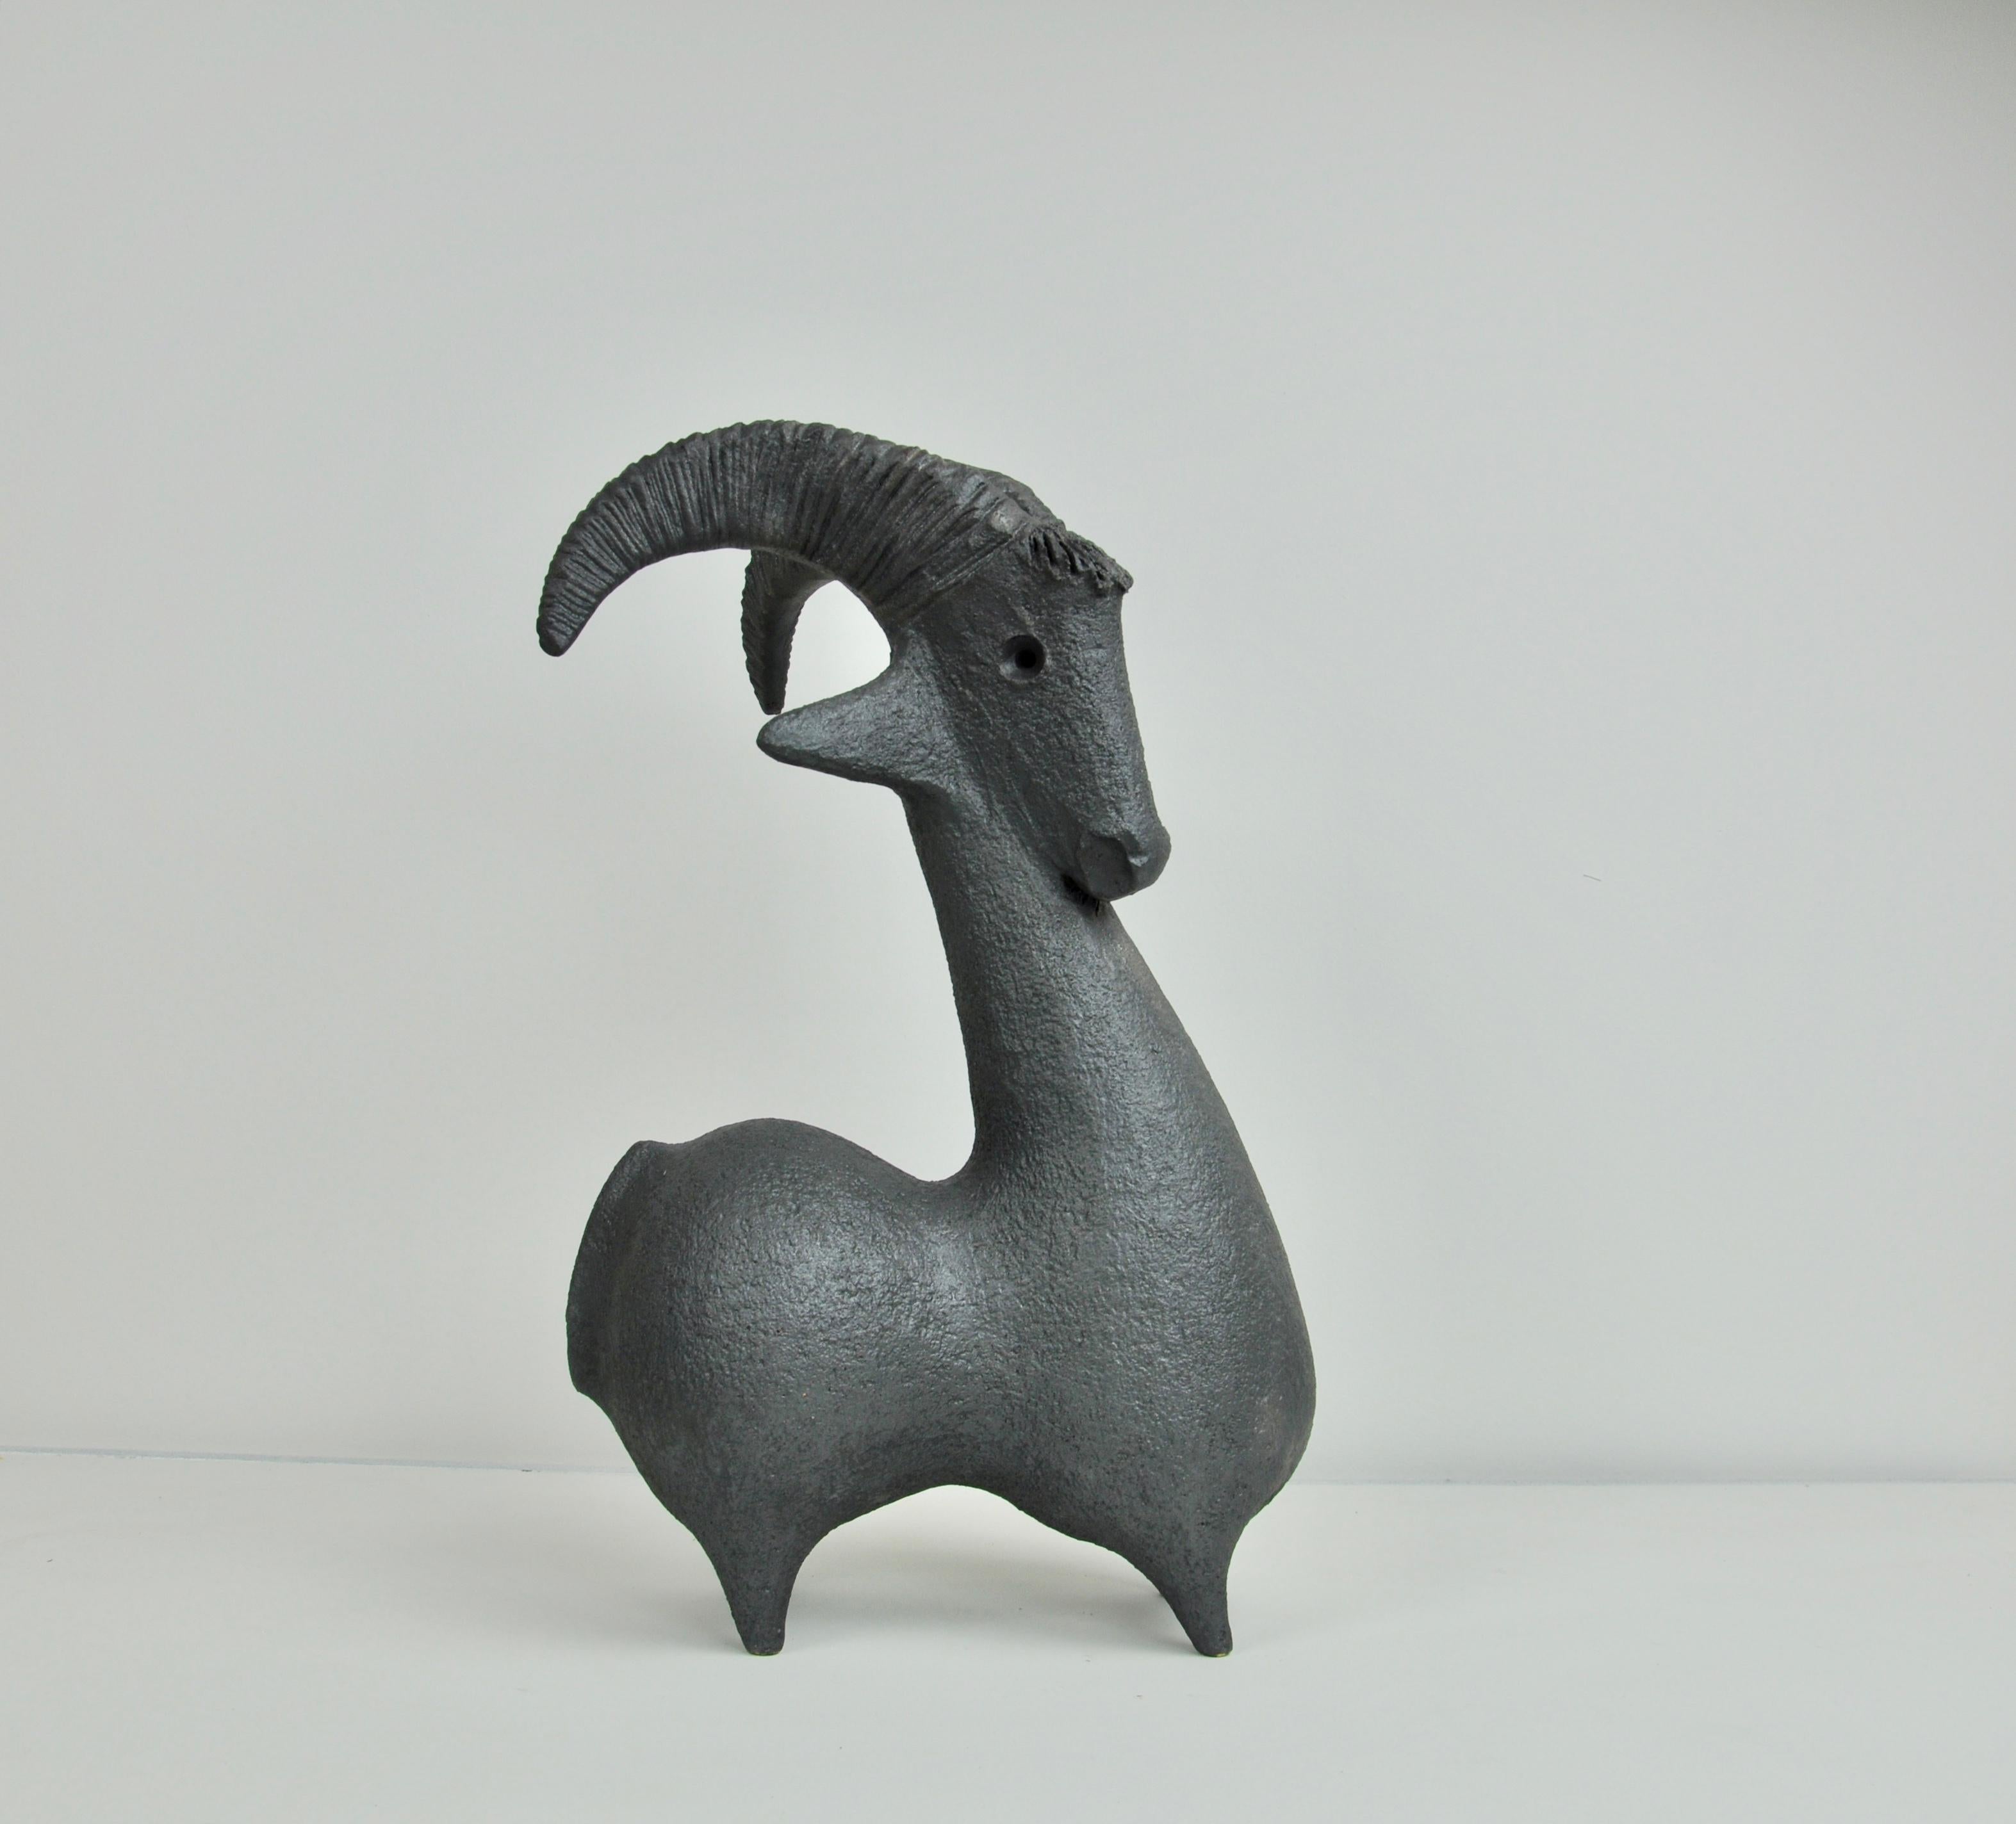 Ceramics in the shape of a goat stamped Dominique Pouchain.